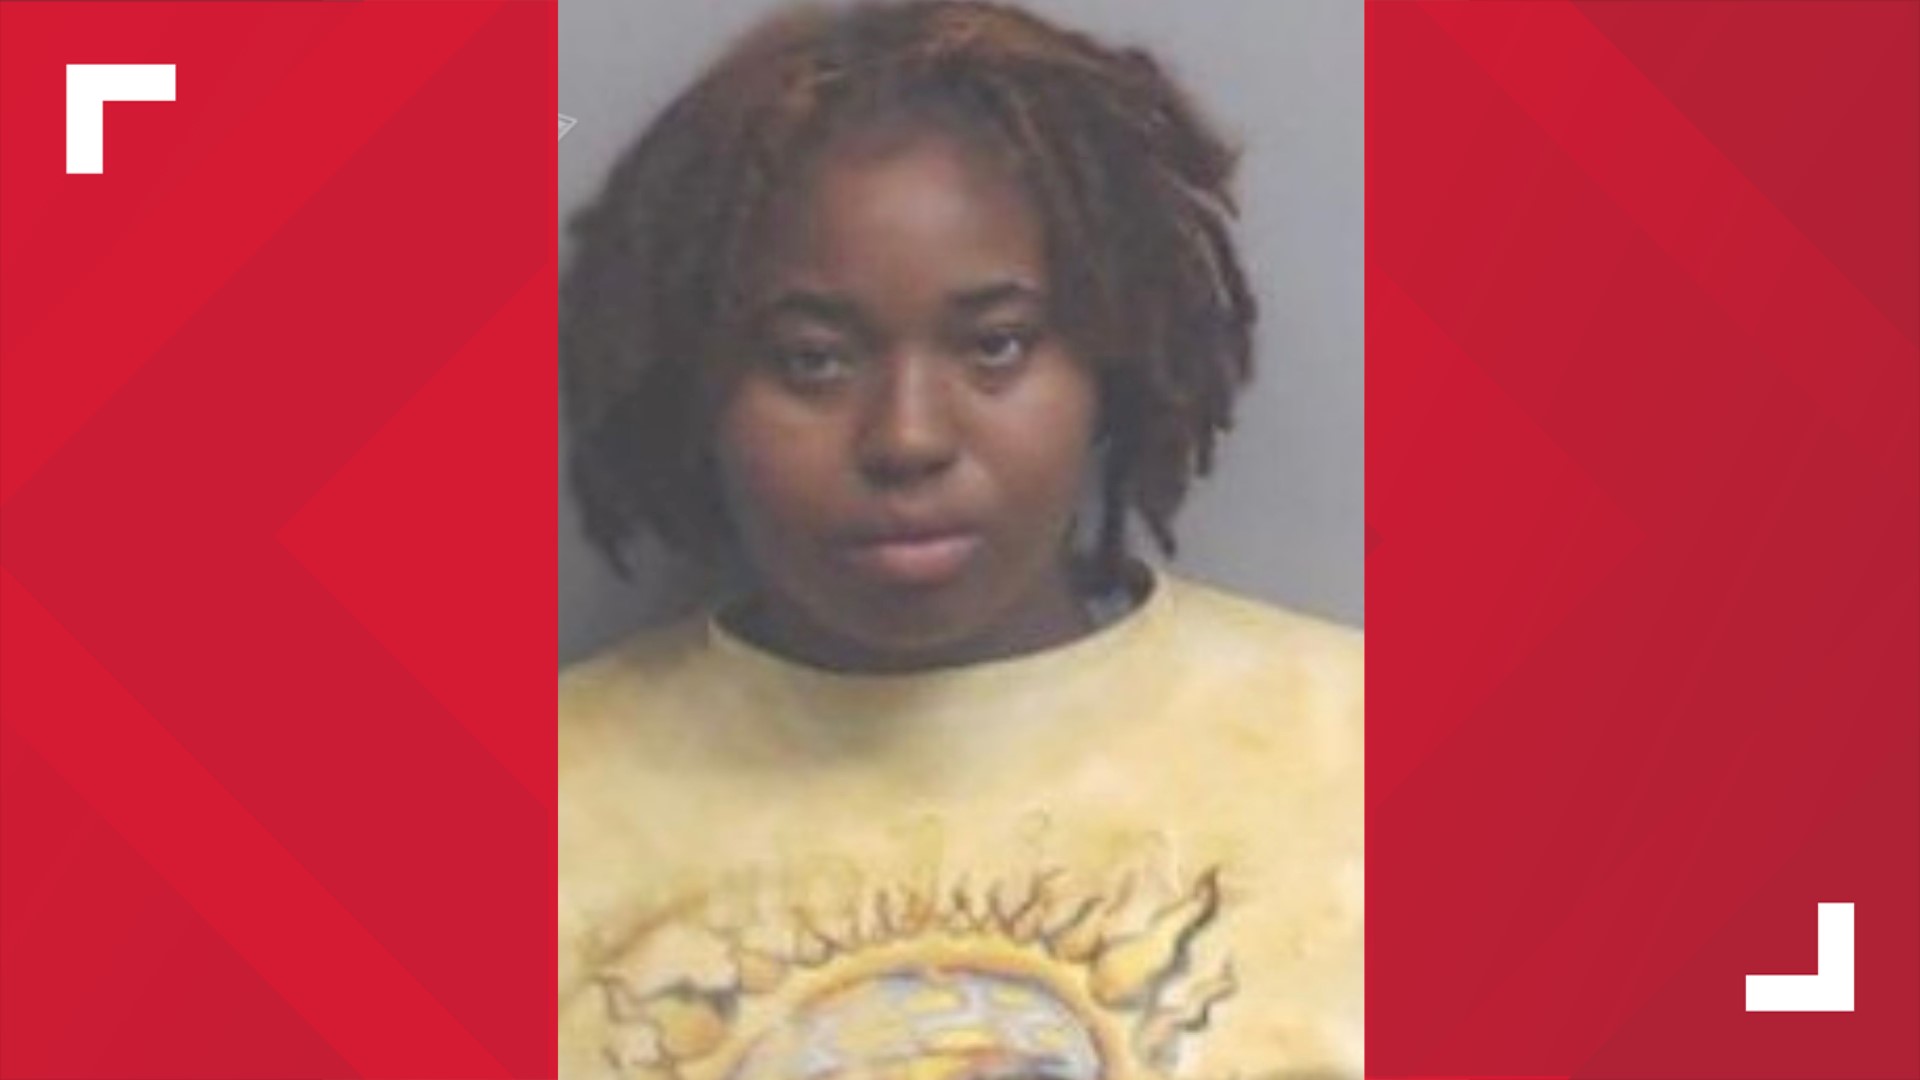 According to Atlanta Police, Sharice Ingram turned herself in on Wednesday in connection to the child's killing and was transported to the Fulton County Jail.